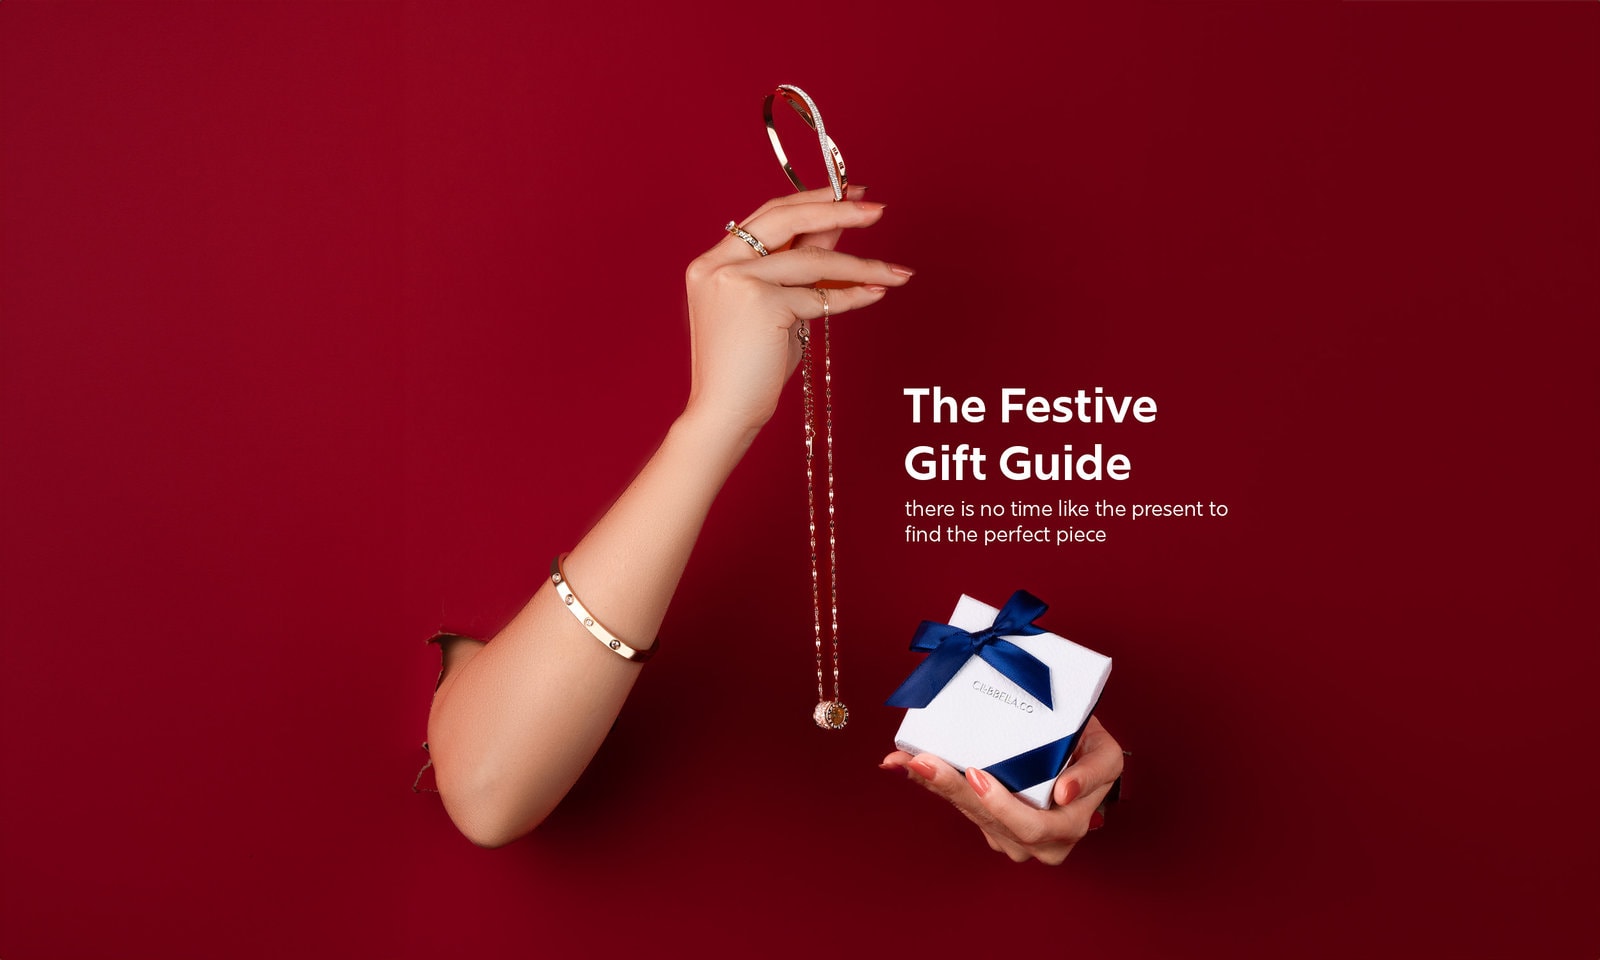 https://m.clubbella.co/gift-guide-2/